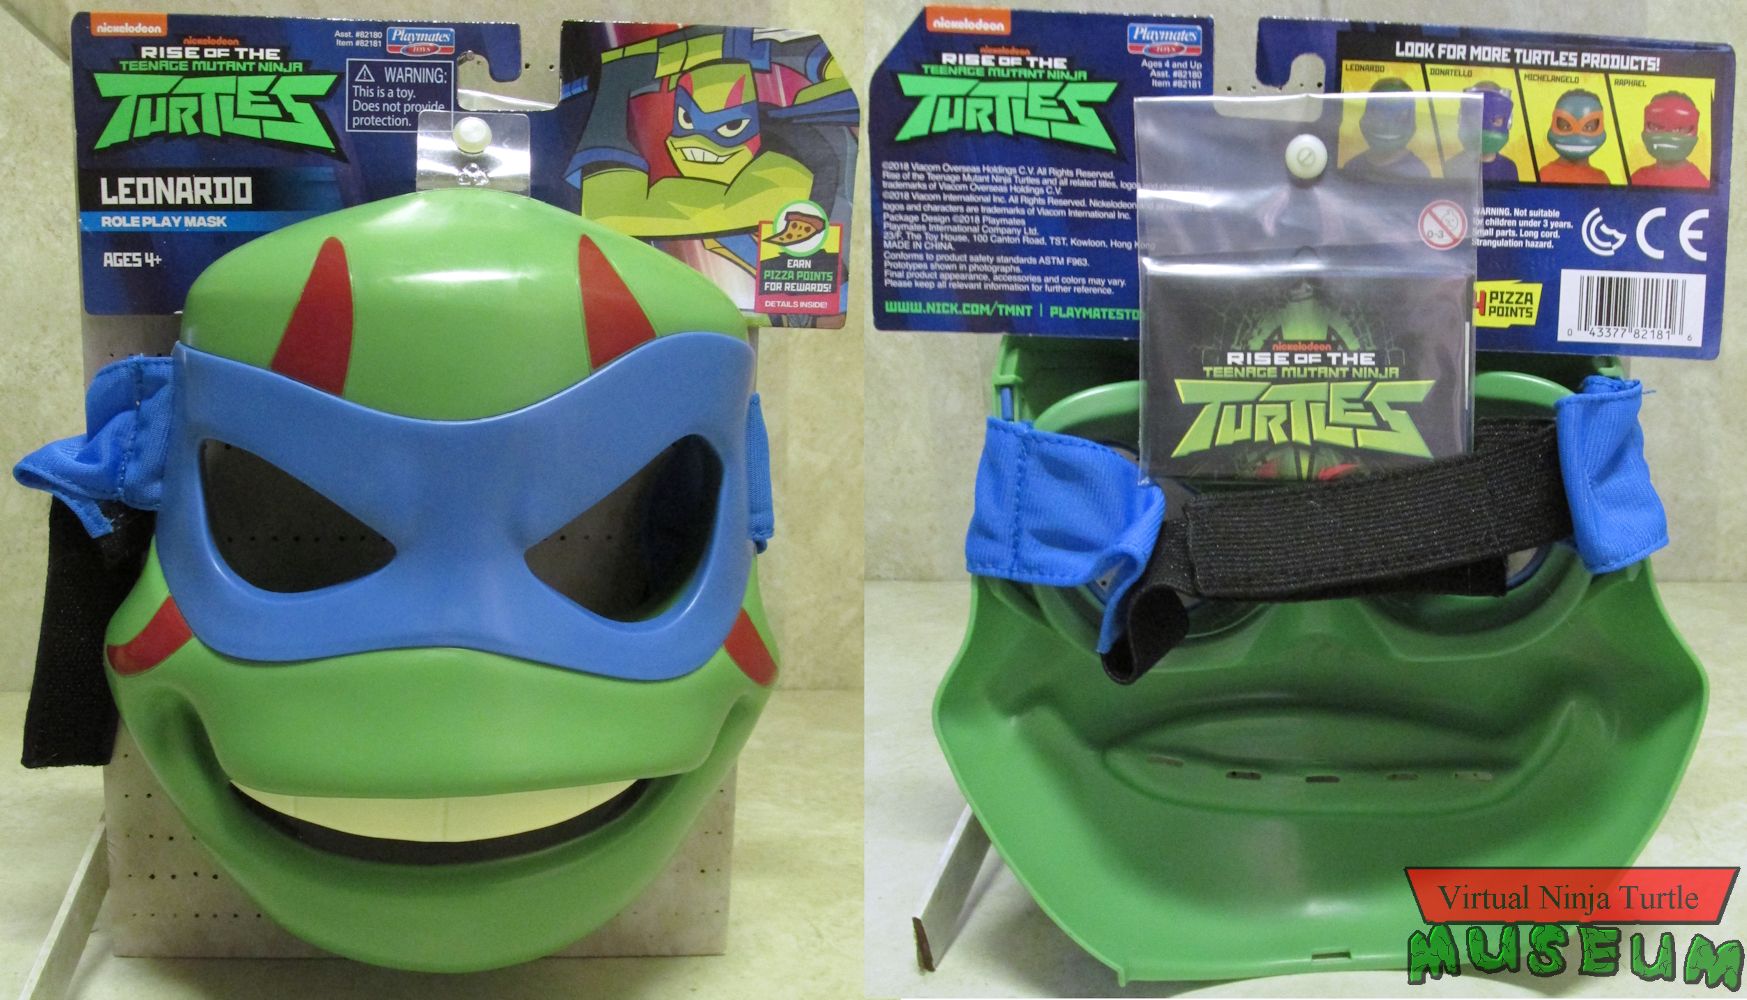 Leonardo Role Play Mask front and back